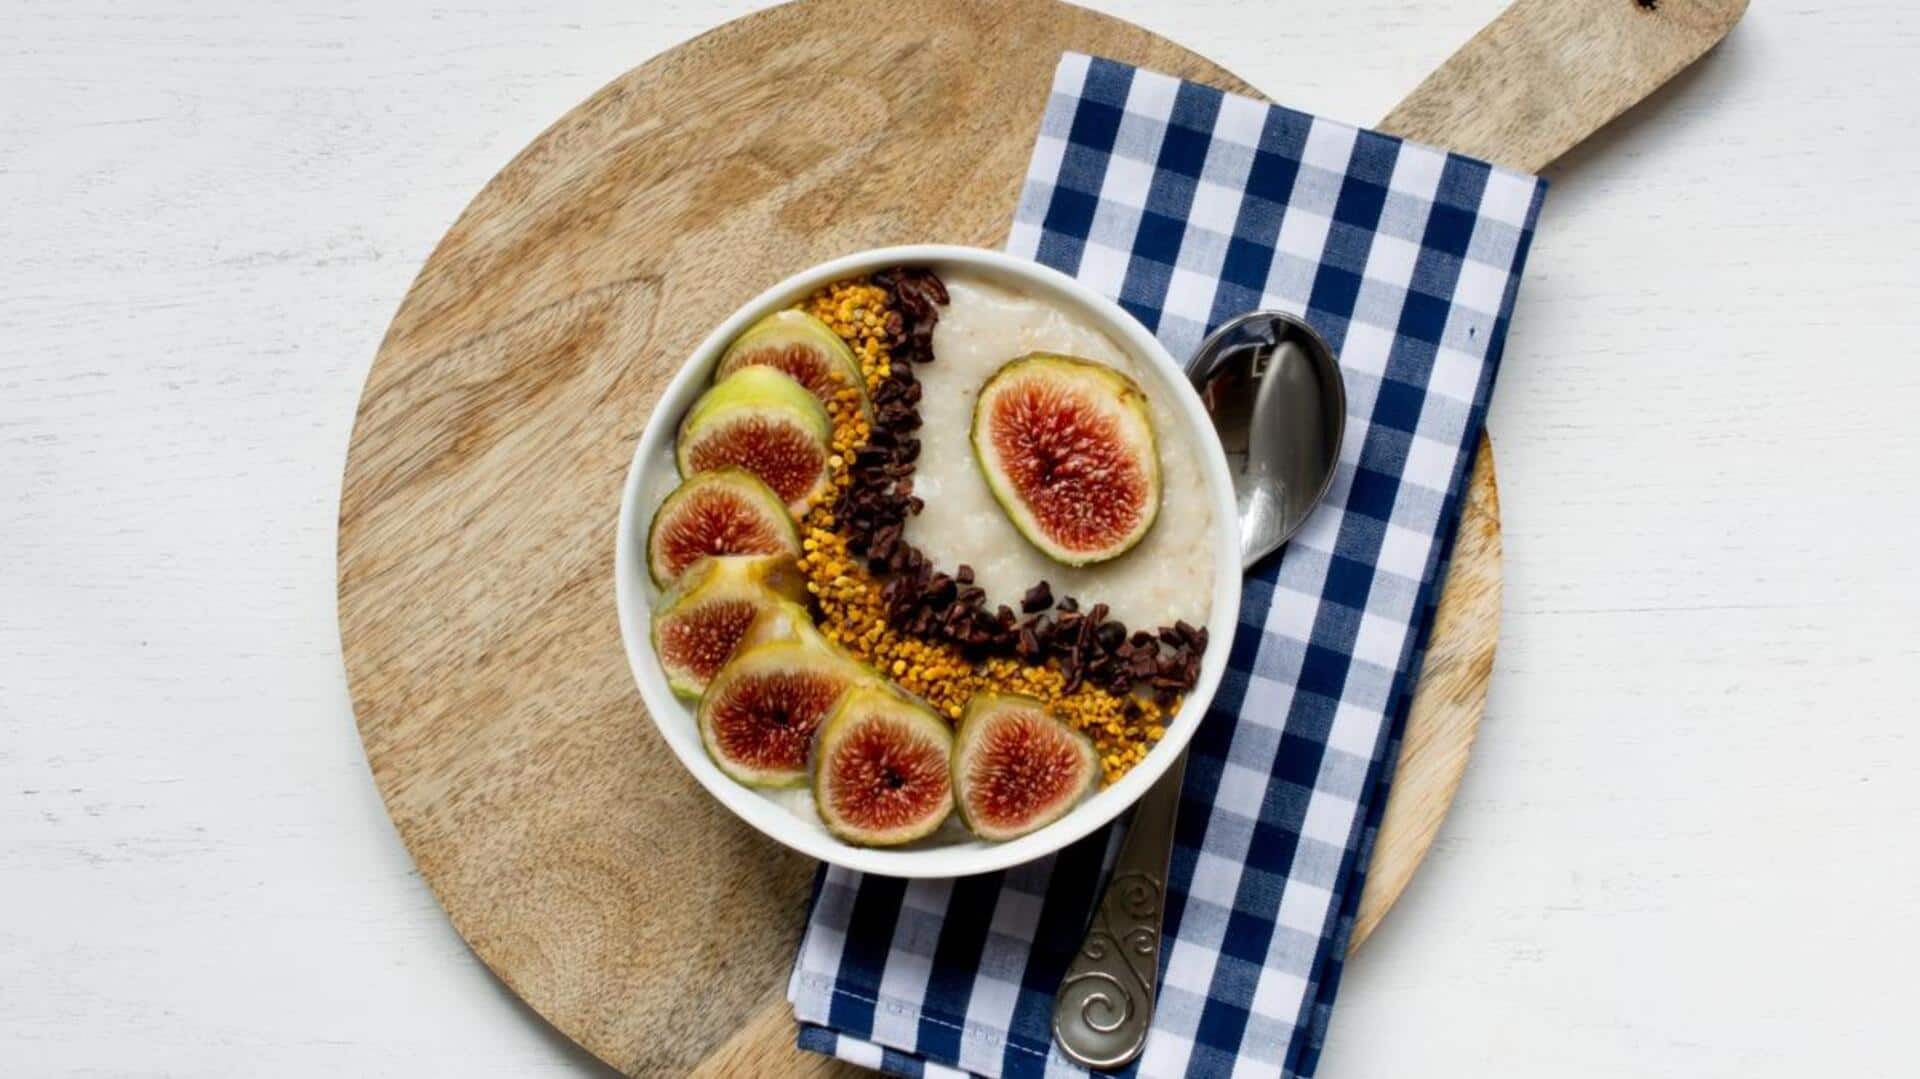 Gorge on these delightful fig-inspired vegan breakfasts